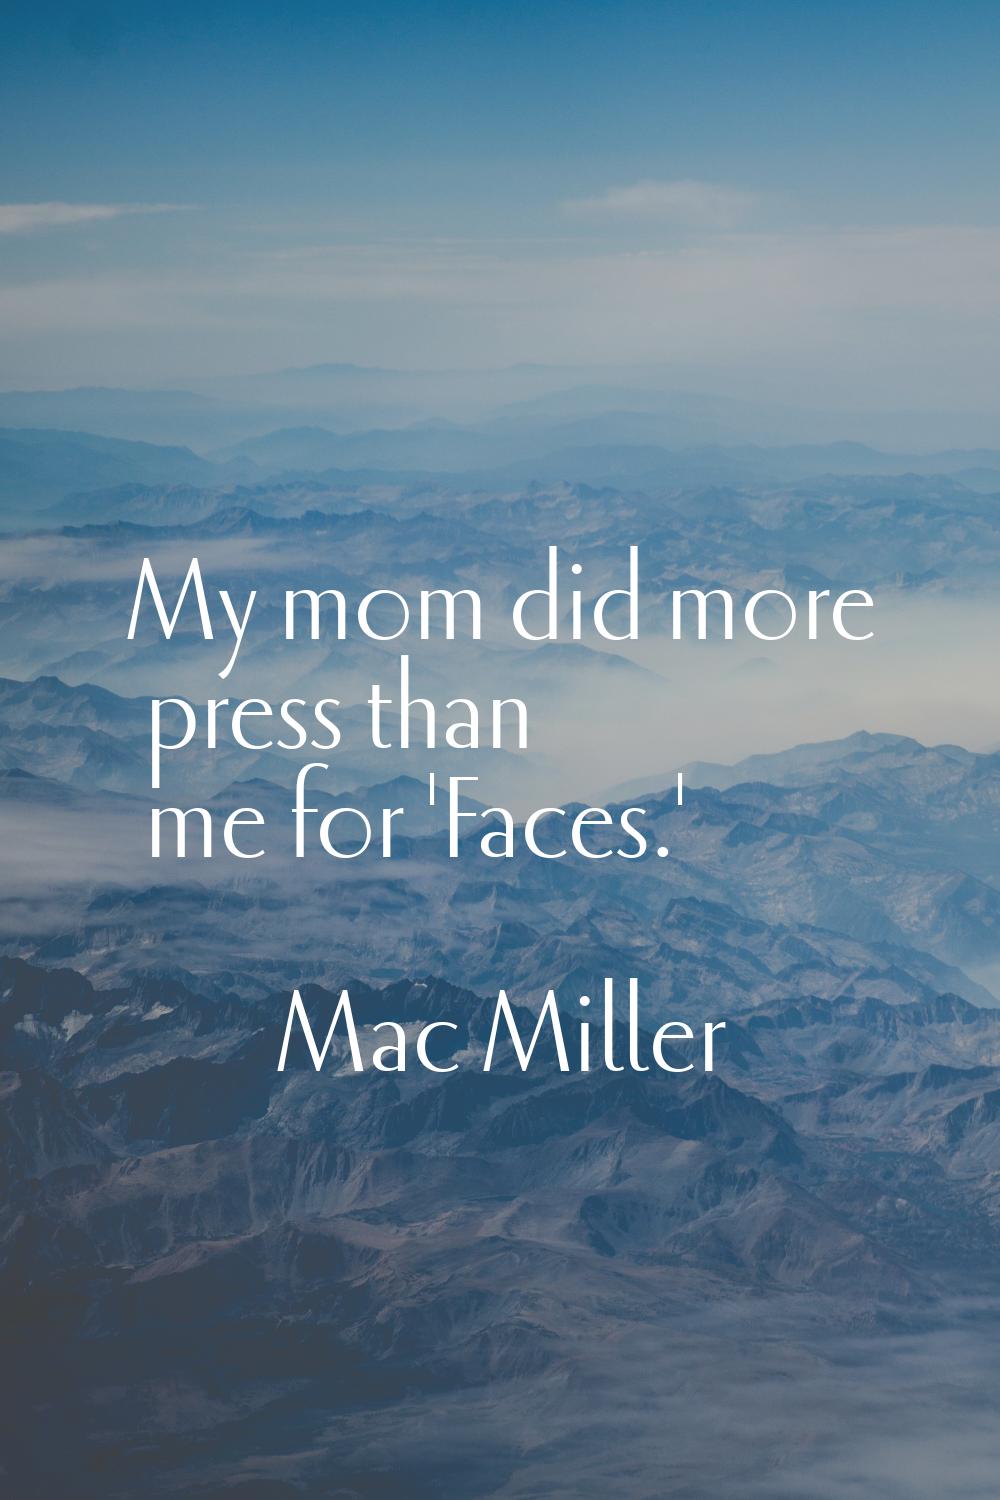 My mom did more press than me for 'Faces.'